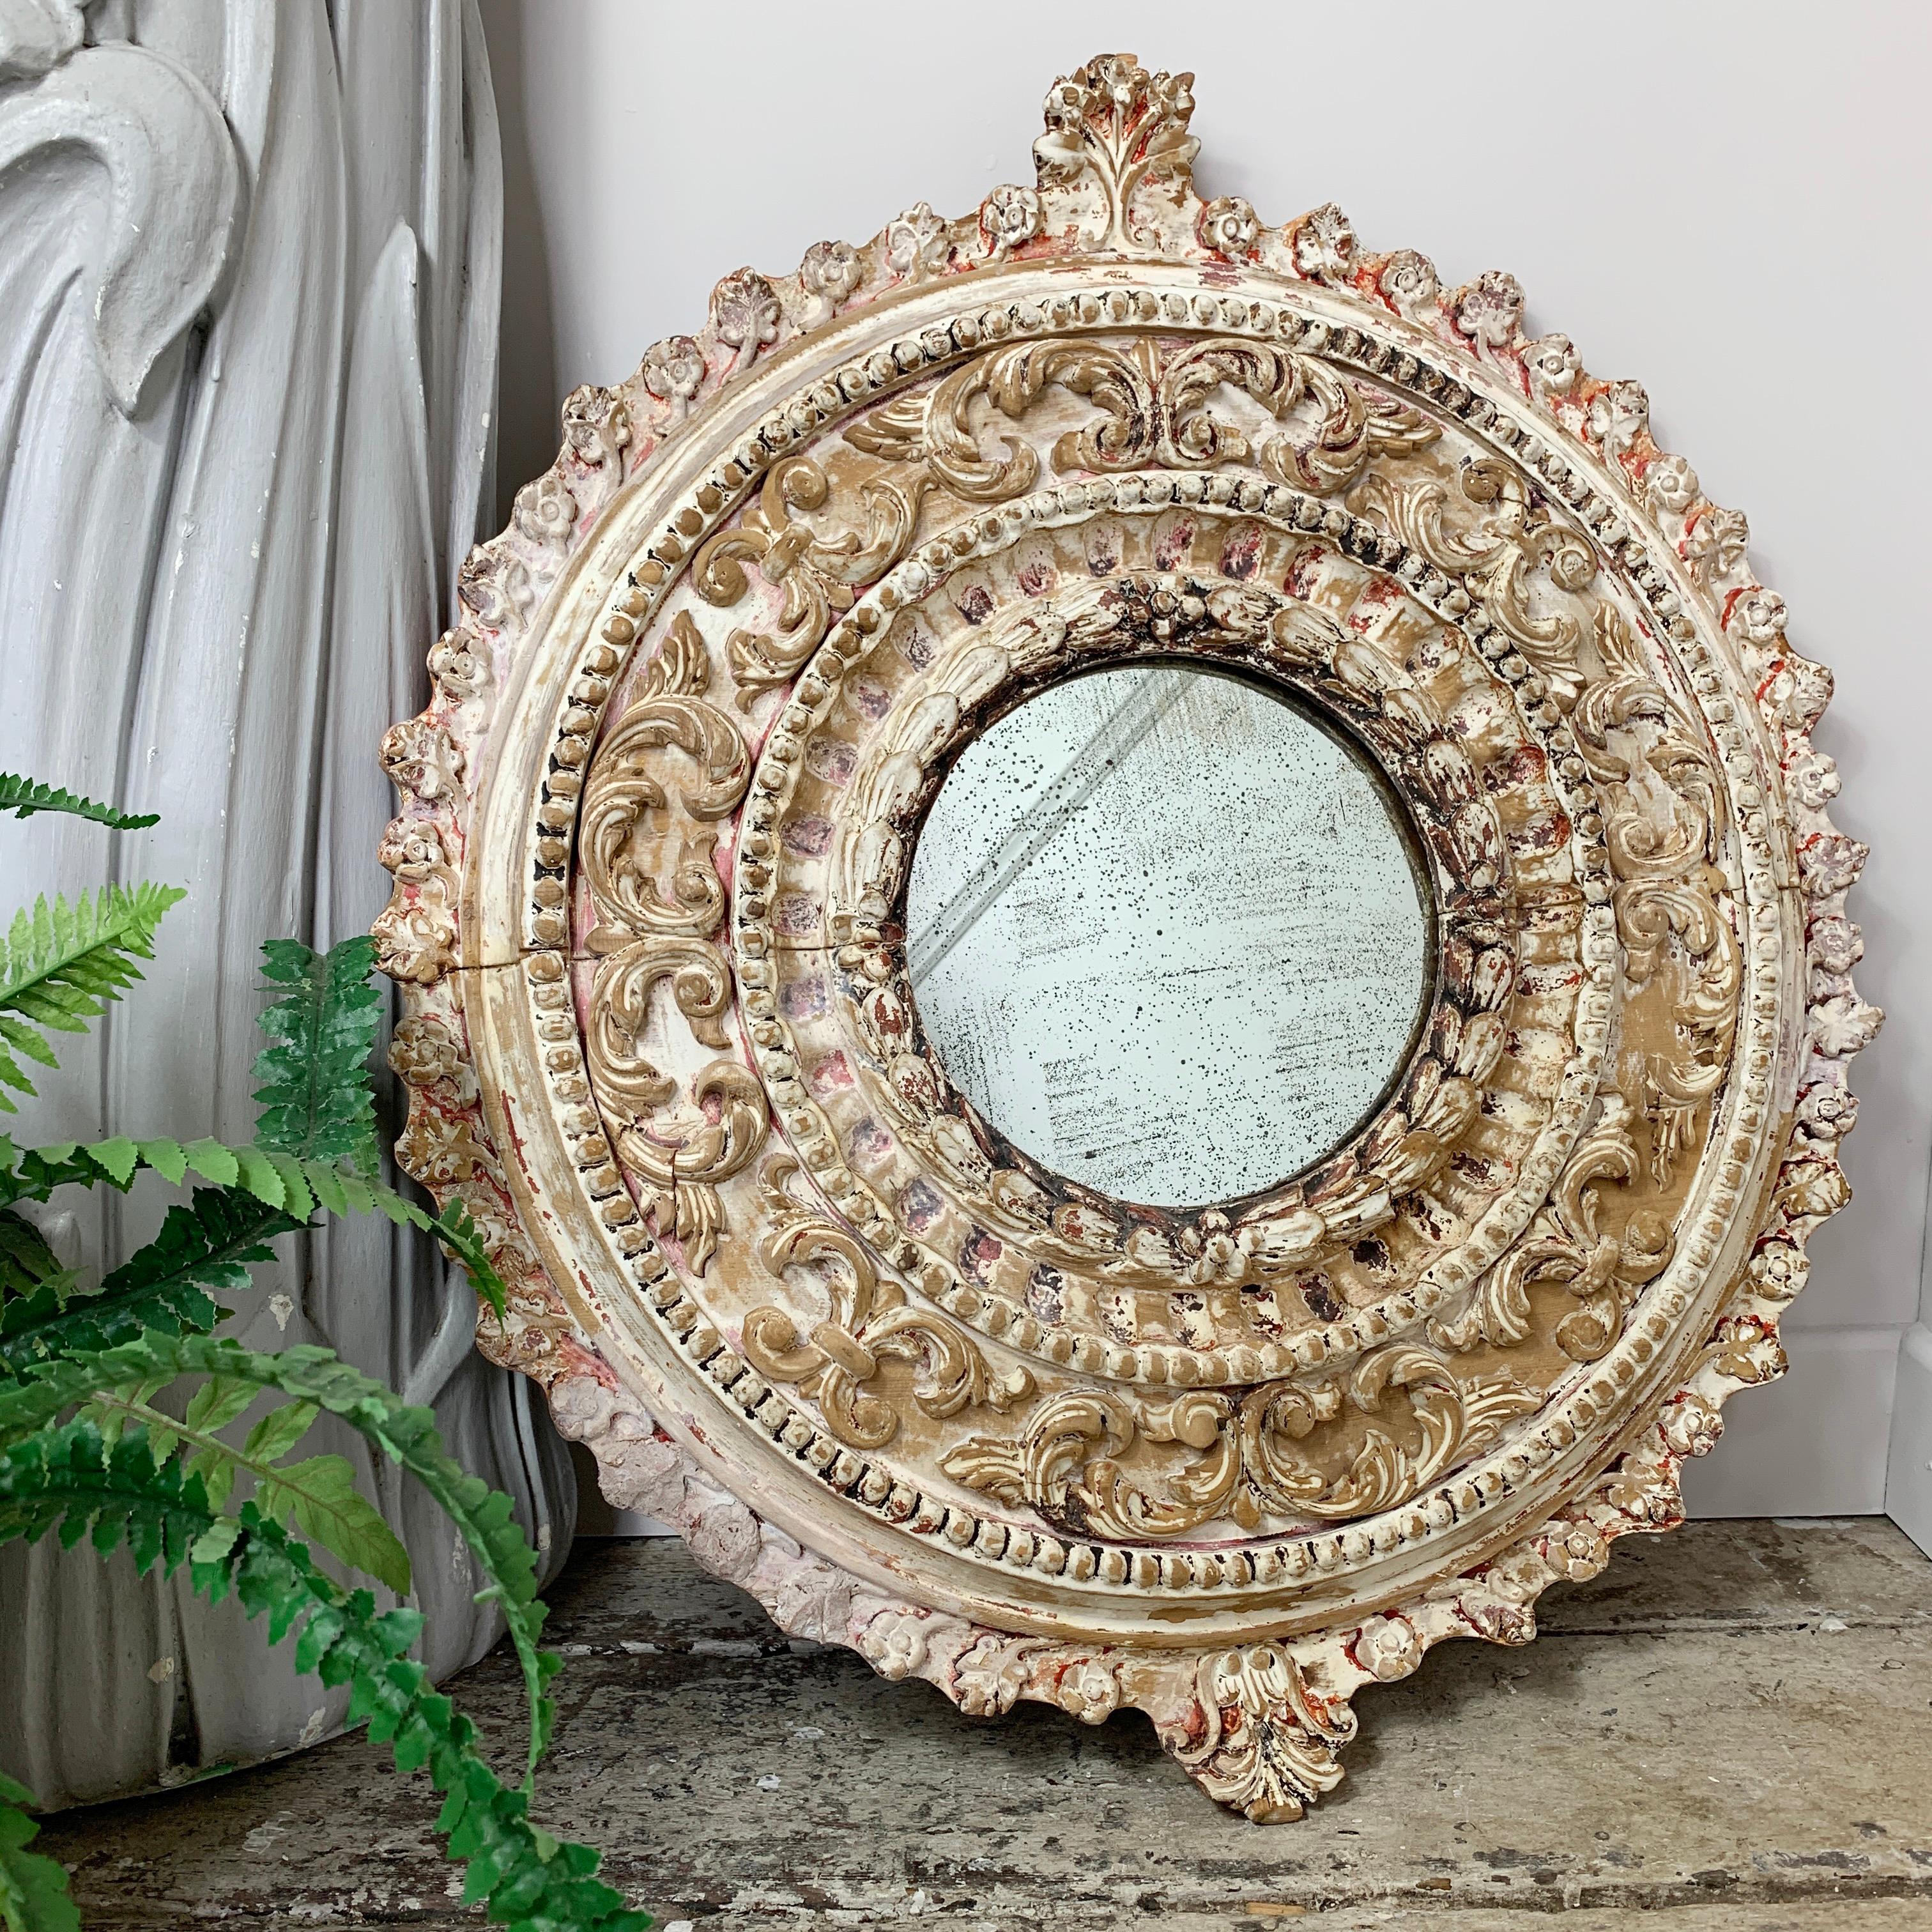 Deeply carved Italian circular wood mirror, circa 1920, in the Florentine style
The frame is profusely decorated with acanthus leaves and fauna, then overpainted
The mirror plate is well foxed, making this an exceptional and unique interiors